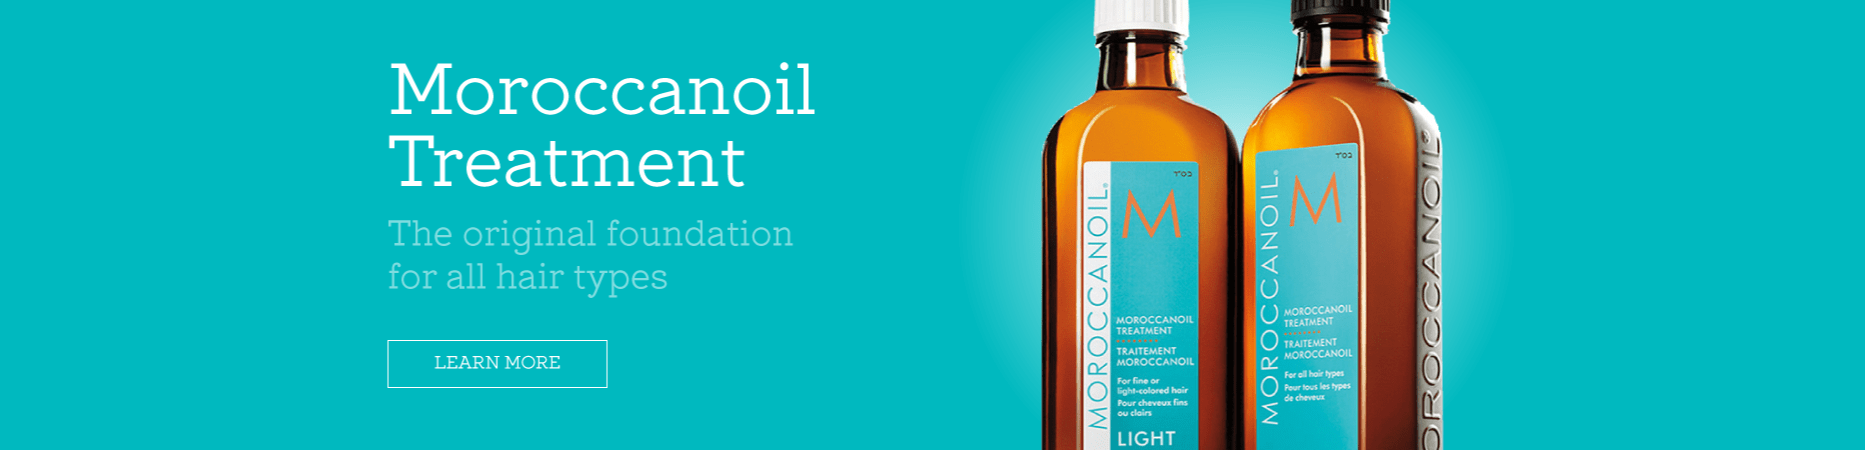 Moroccanoil hair care products